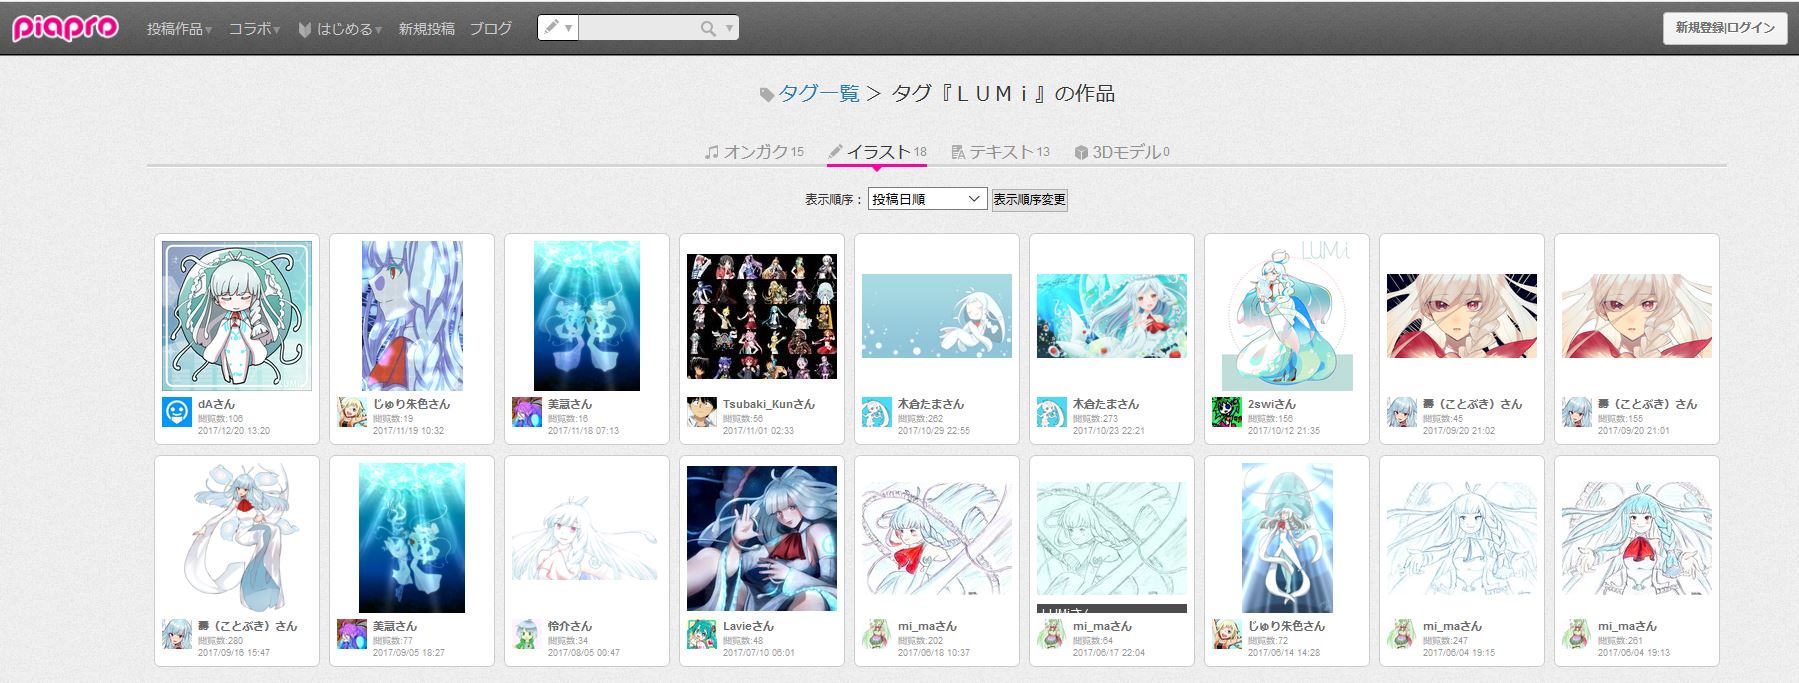 VOCALOID4 Library LUMi Now Available in the VOCALOID Shop! - VNN